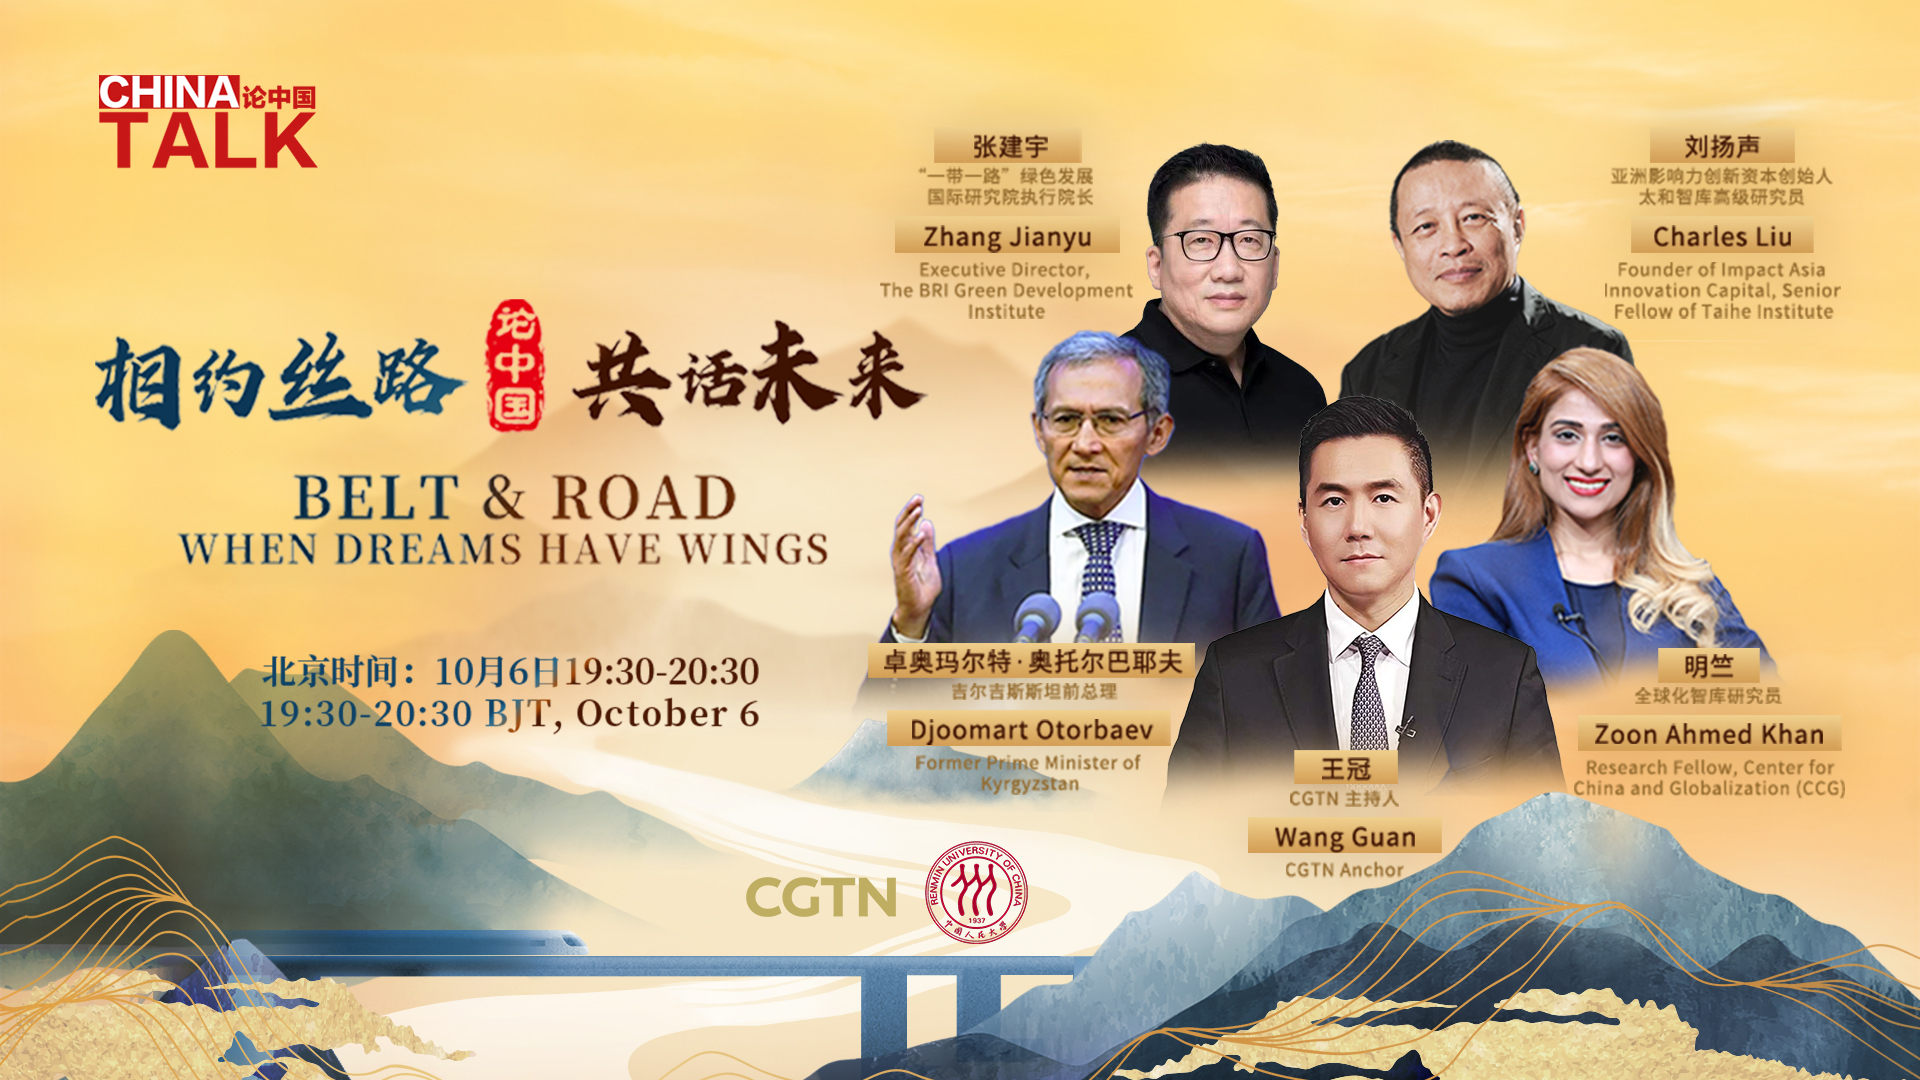 Live: China Talk special 'Belt & Road: When Dreams Have Wings'